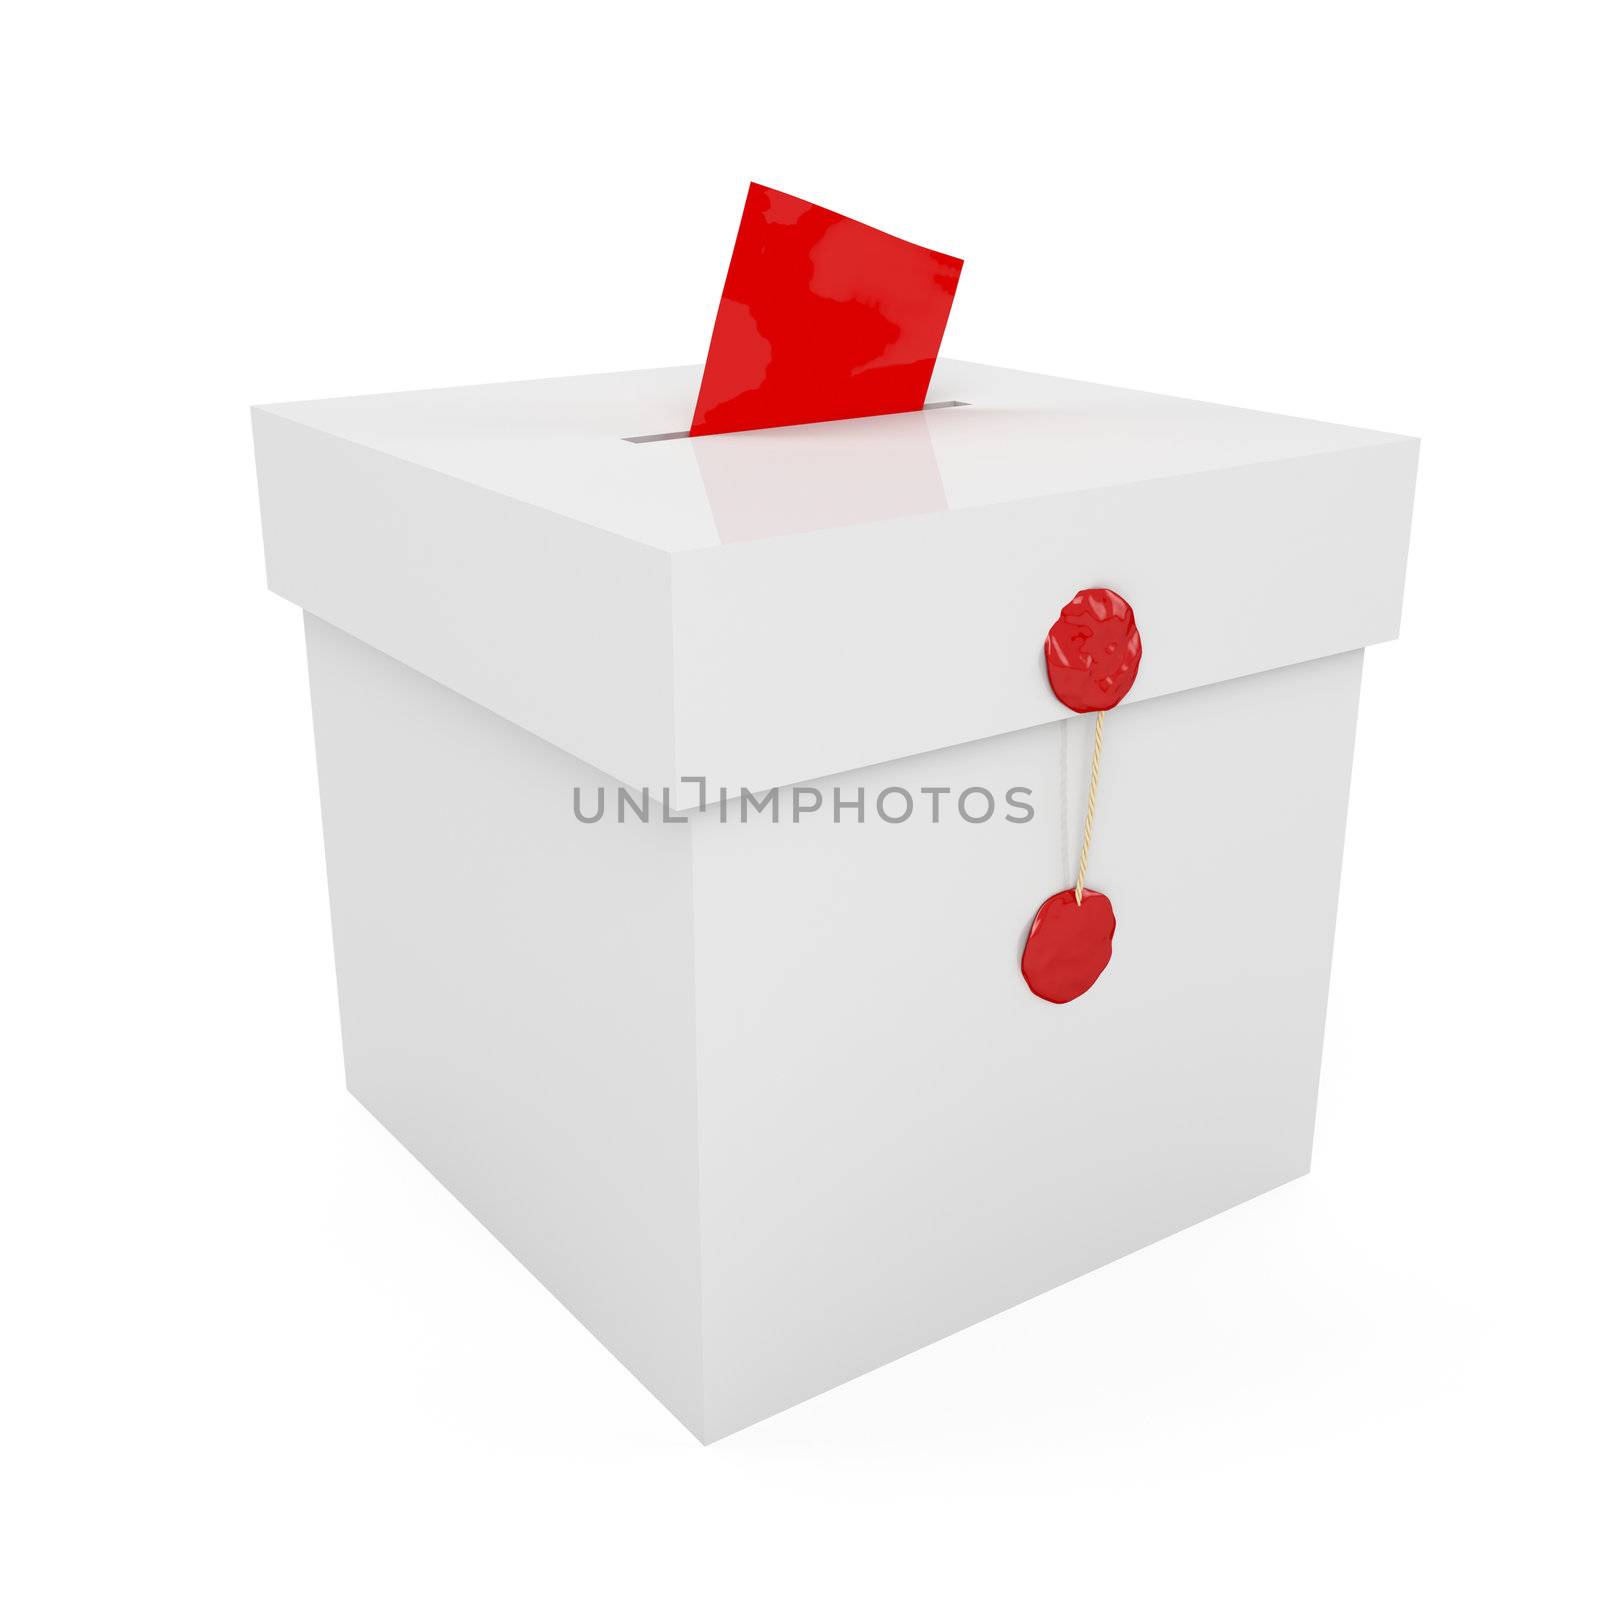 Ballot box by magraphics